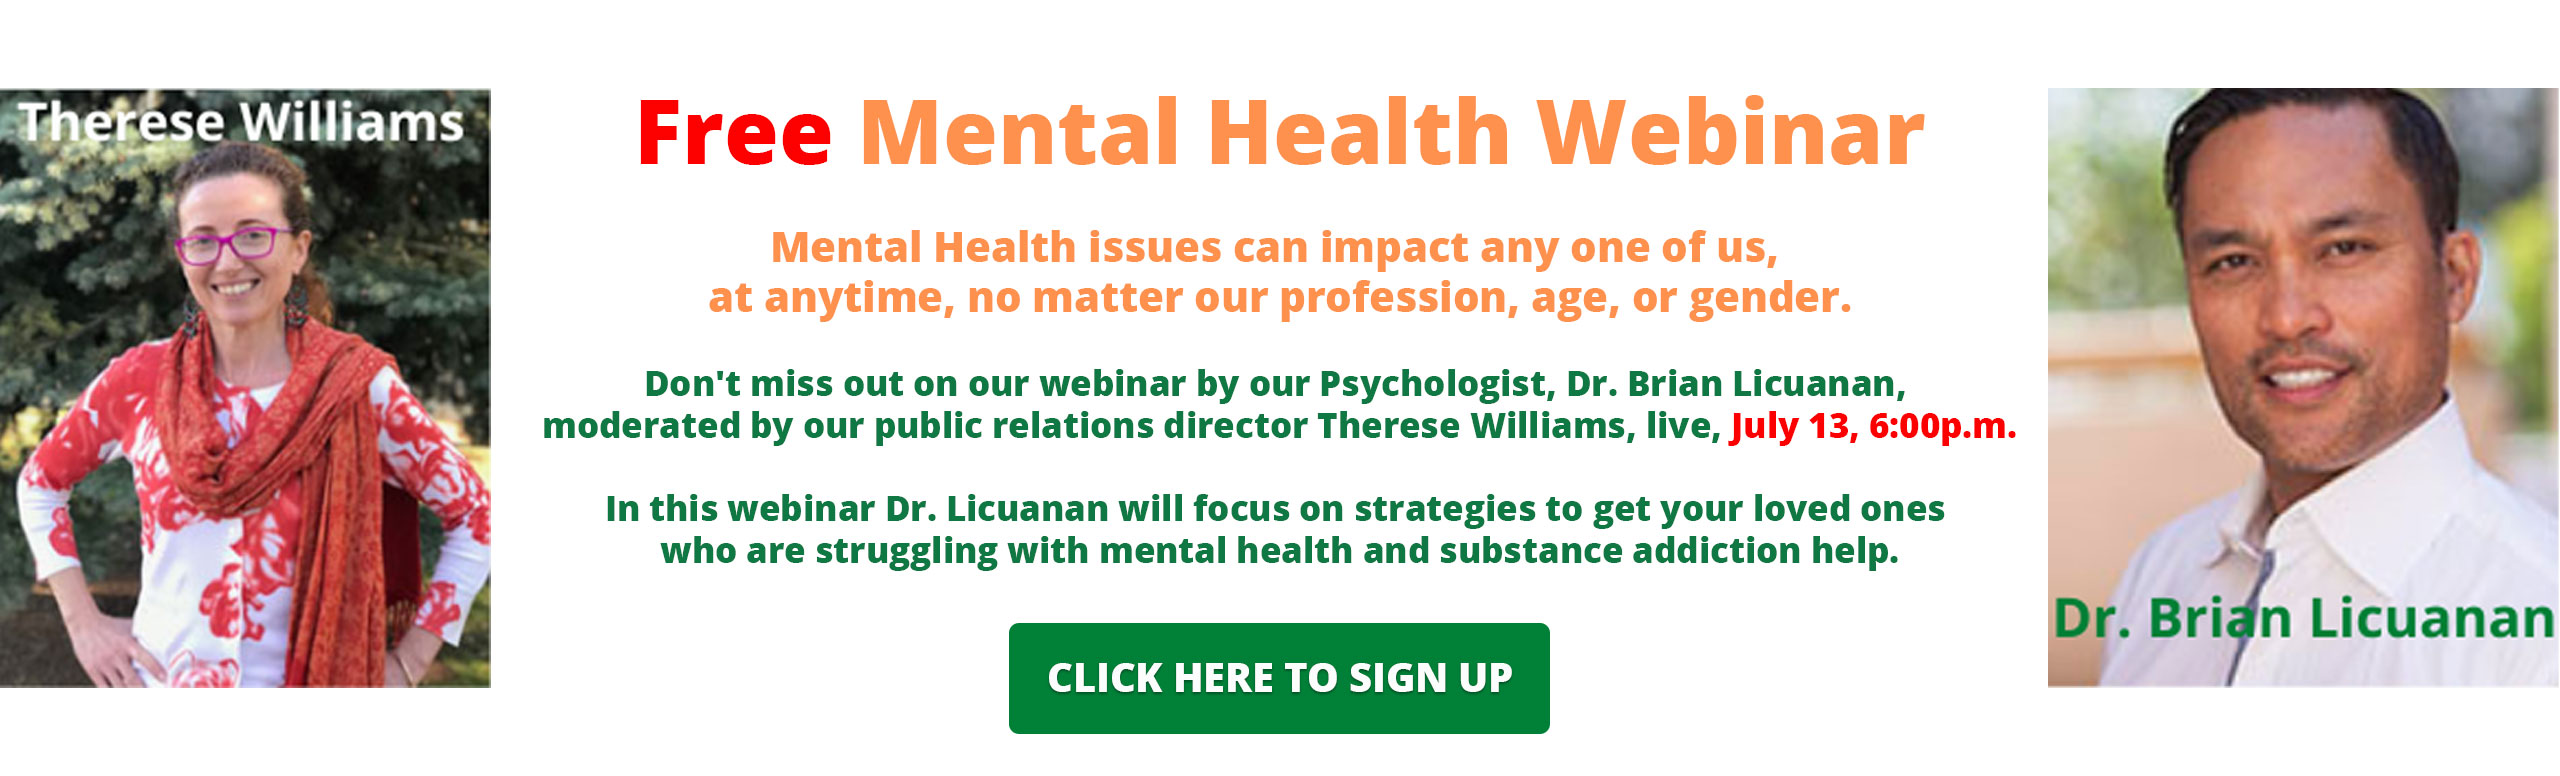 Banner picture of Therese Williams smiling and picture of Dr. Brian Licuanan smiling. Banner says:

Free Mental Health Webinar
Mental Health issues can impact any one of us at anytime, no matter our profession, age, or gender.

Don't miss out on our webinar by our Psychologist, Dr. Brian Licuanan, moderated by our public relations director Therese Williams, live, July 13, 6:00 p.m.

In this webinar Dr. Licuanan will focus on strategies to get your loved ones who are struggling with mental health and substance addiction help.

{CLICK HERE TO SIGN UP}